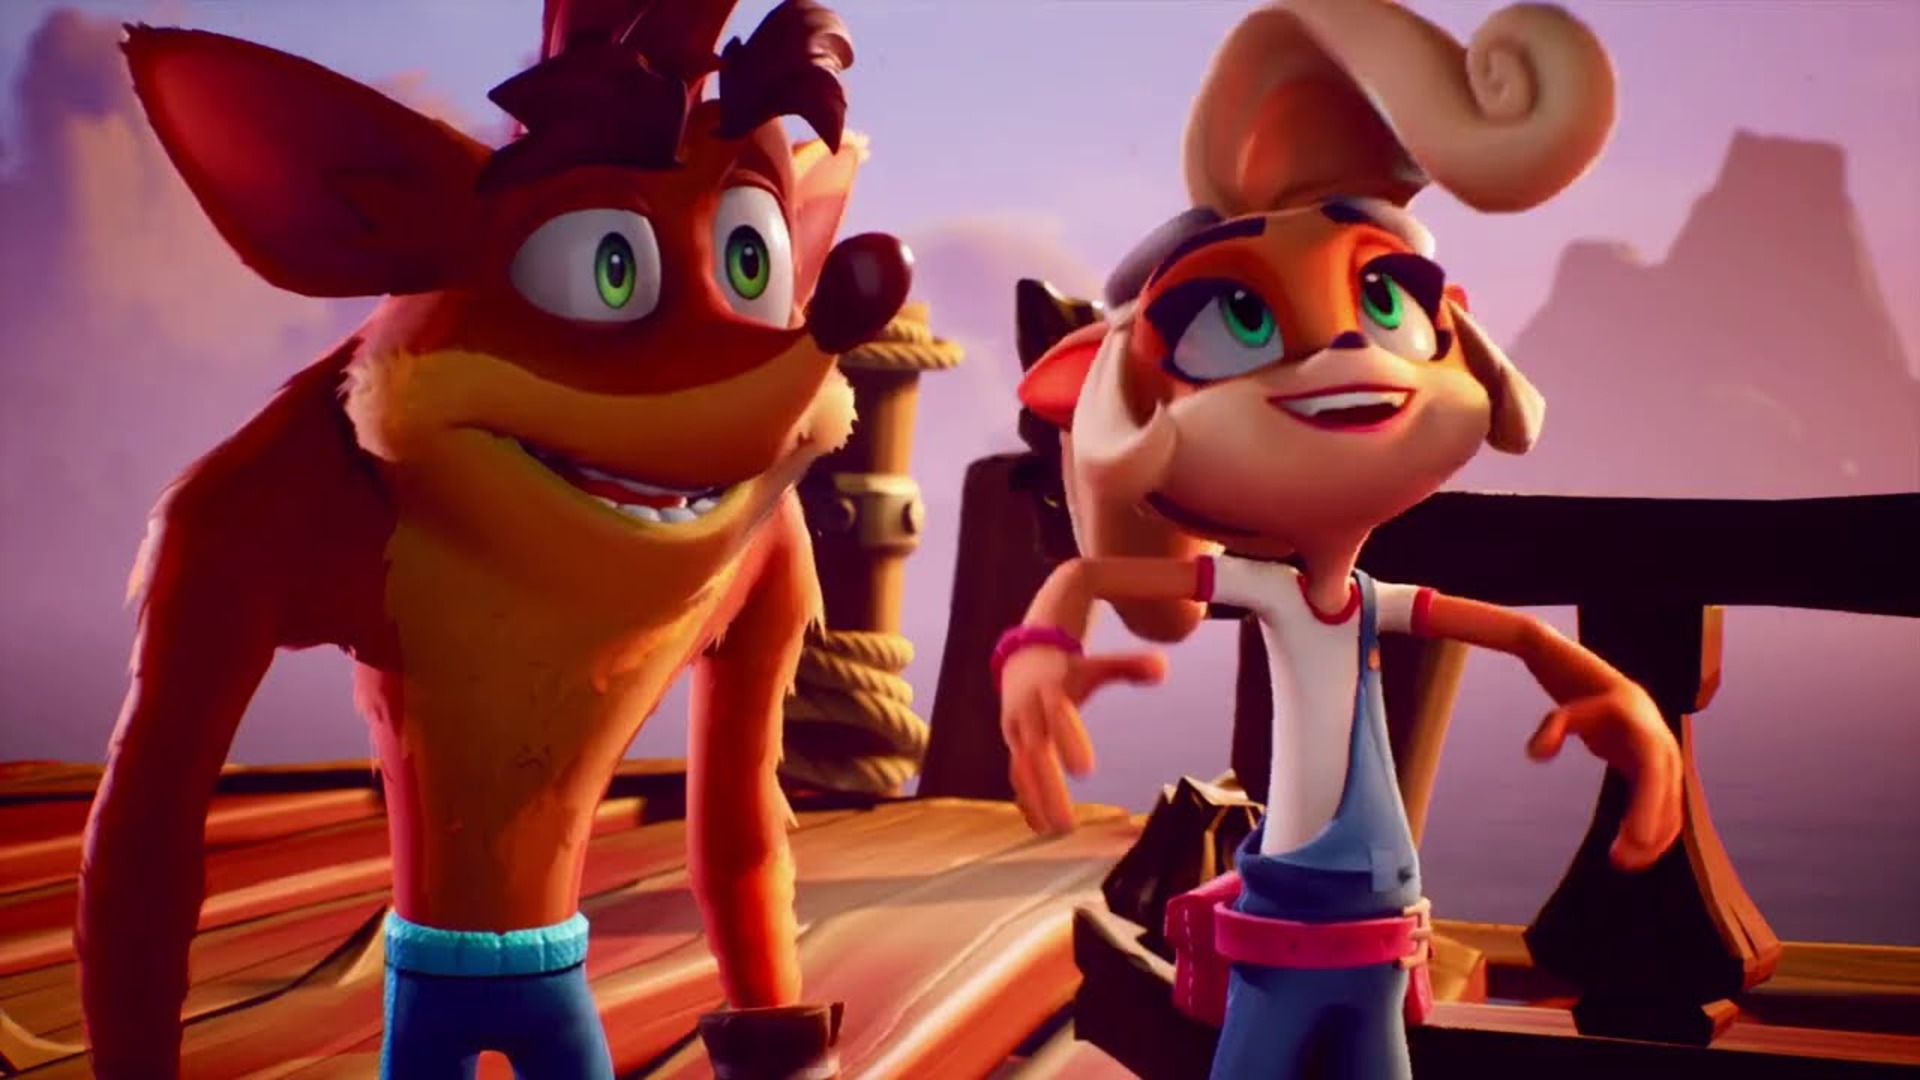 Amid mass layoffs, Crash Bandicoot and Warzone studio Toys for Bob is going indie, but says it’s exploring a “possible” partnership with Xbox